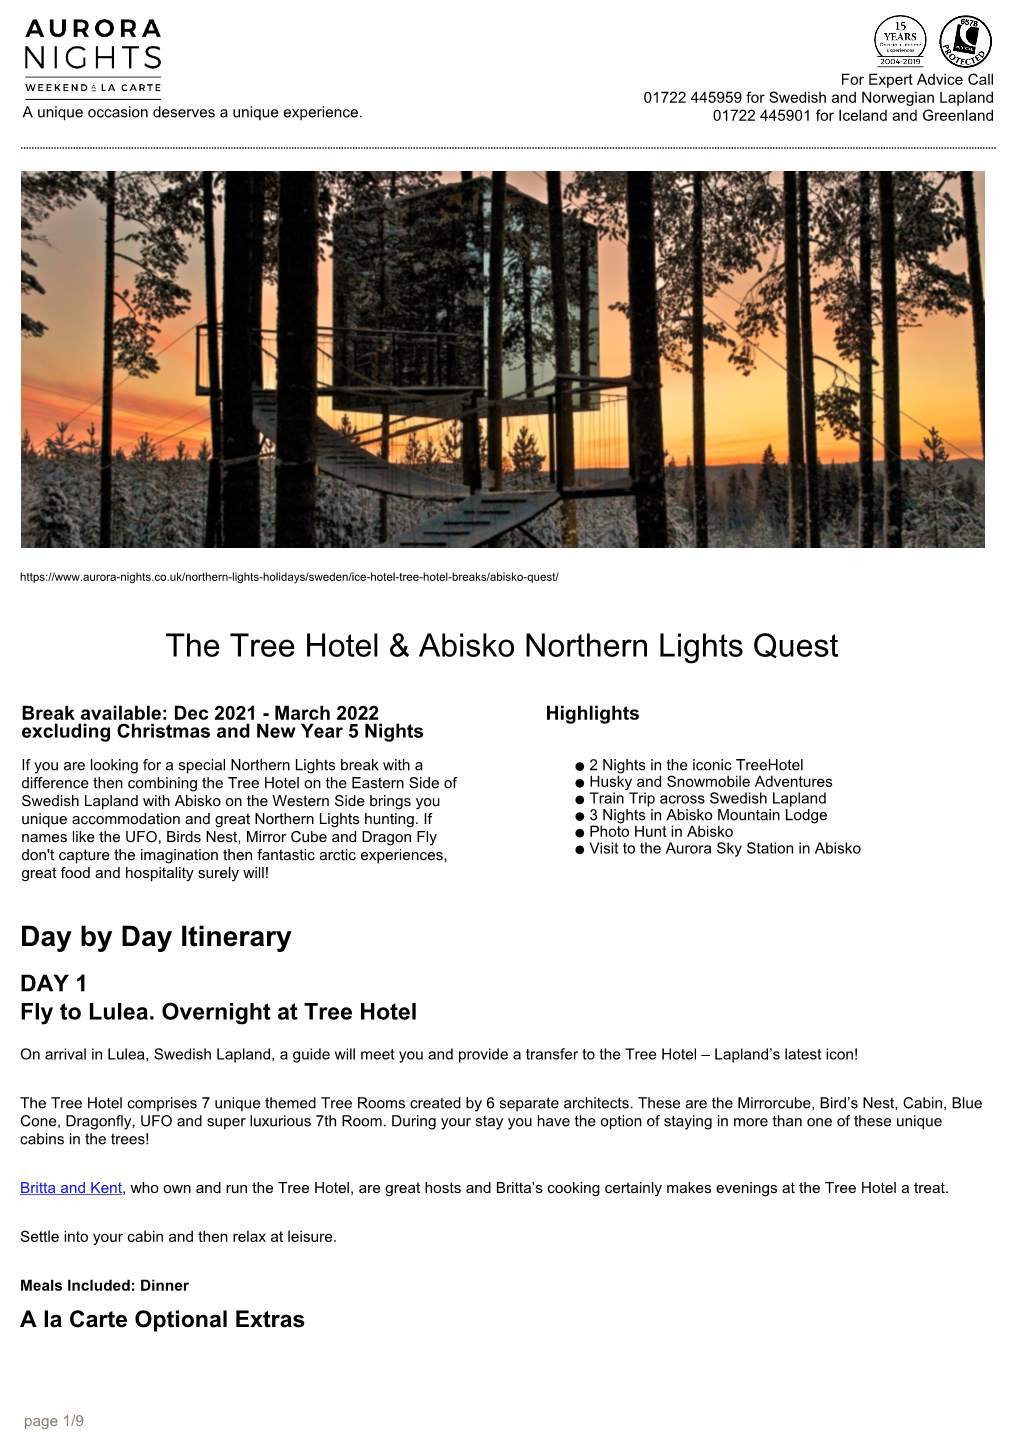 The Tree Hotel & Abisko Northern Lights Quest